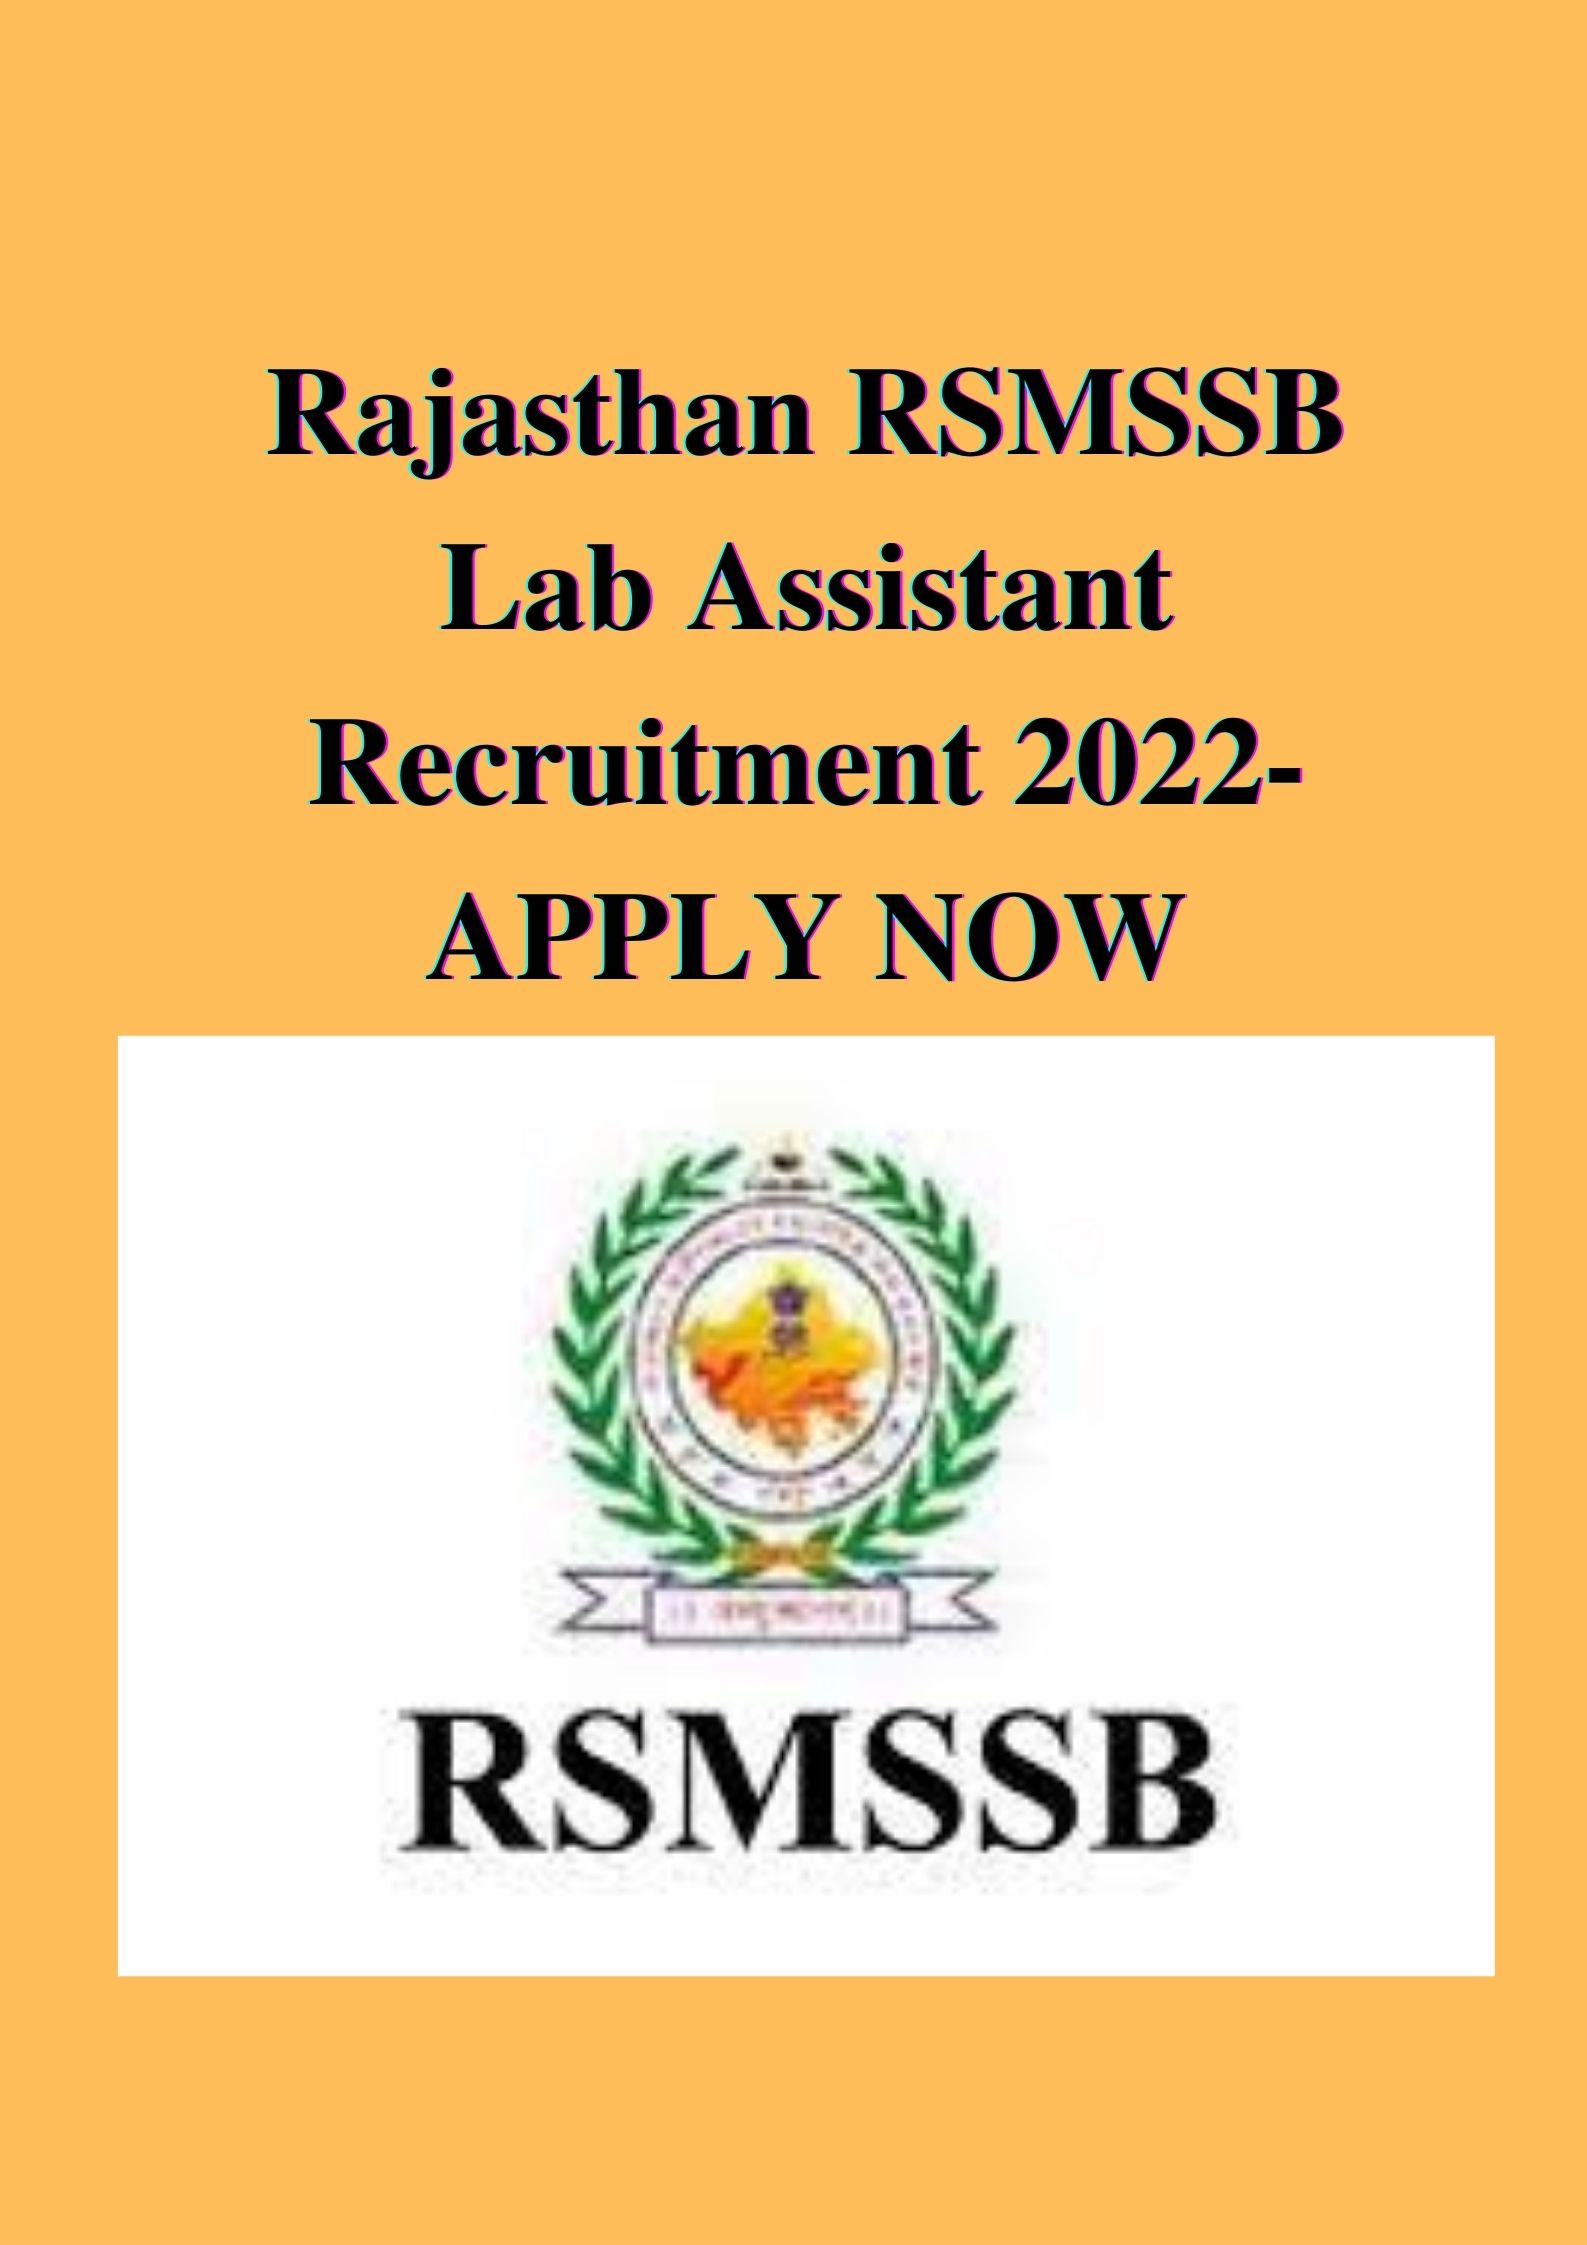 Rajasthan RSMSSB Lab Assistant Recruitment 2022- APPLY NOW